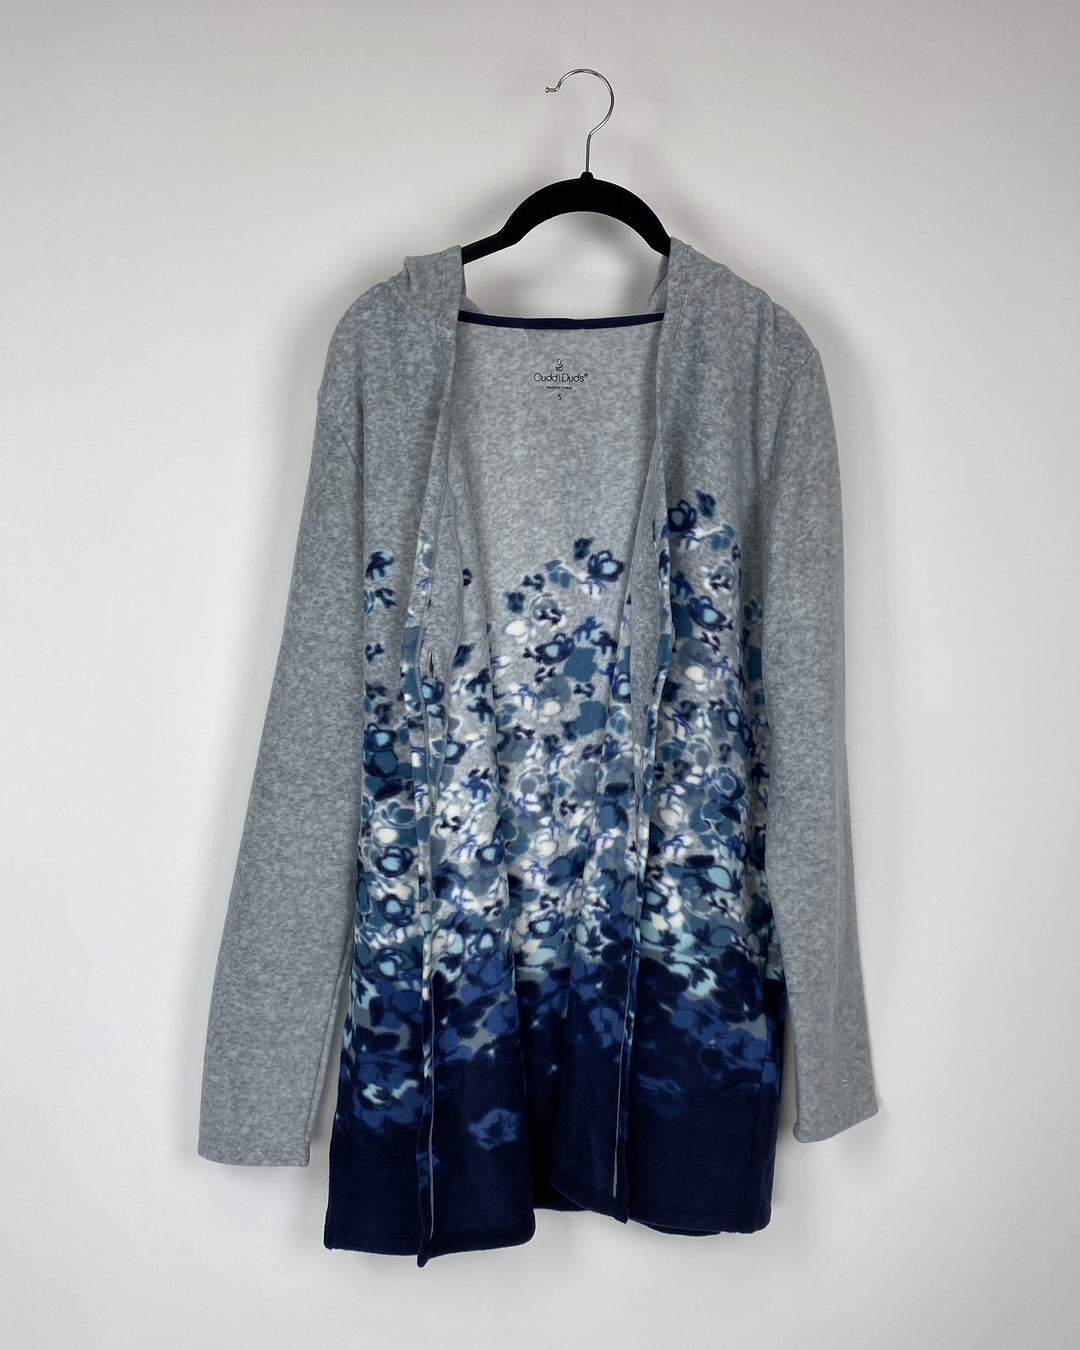 Blue And Grey Fleece Printed Cardigan - Size 2/4